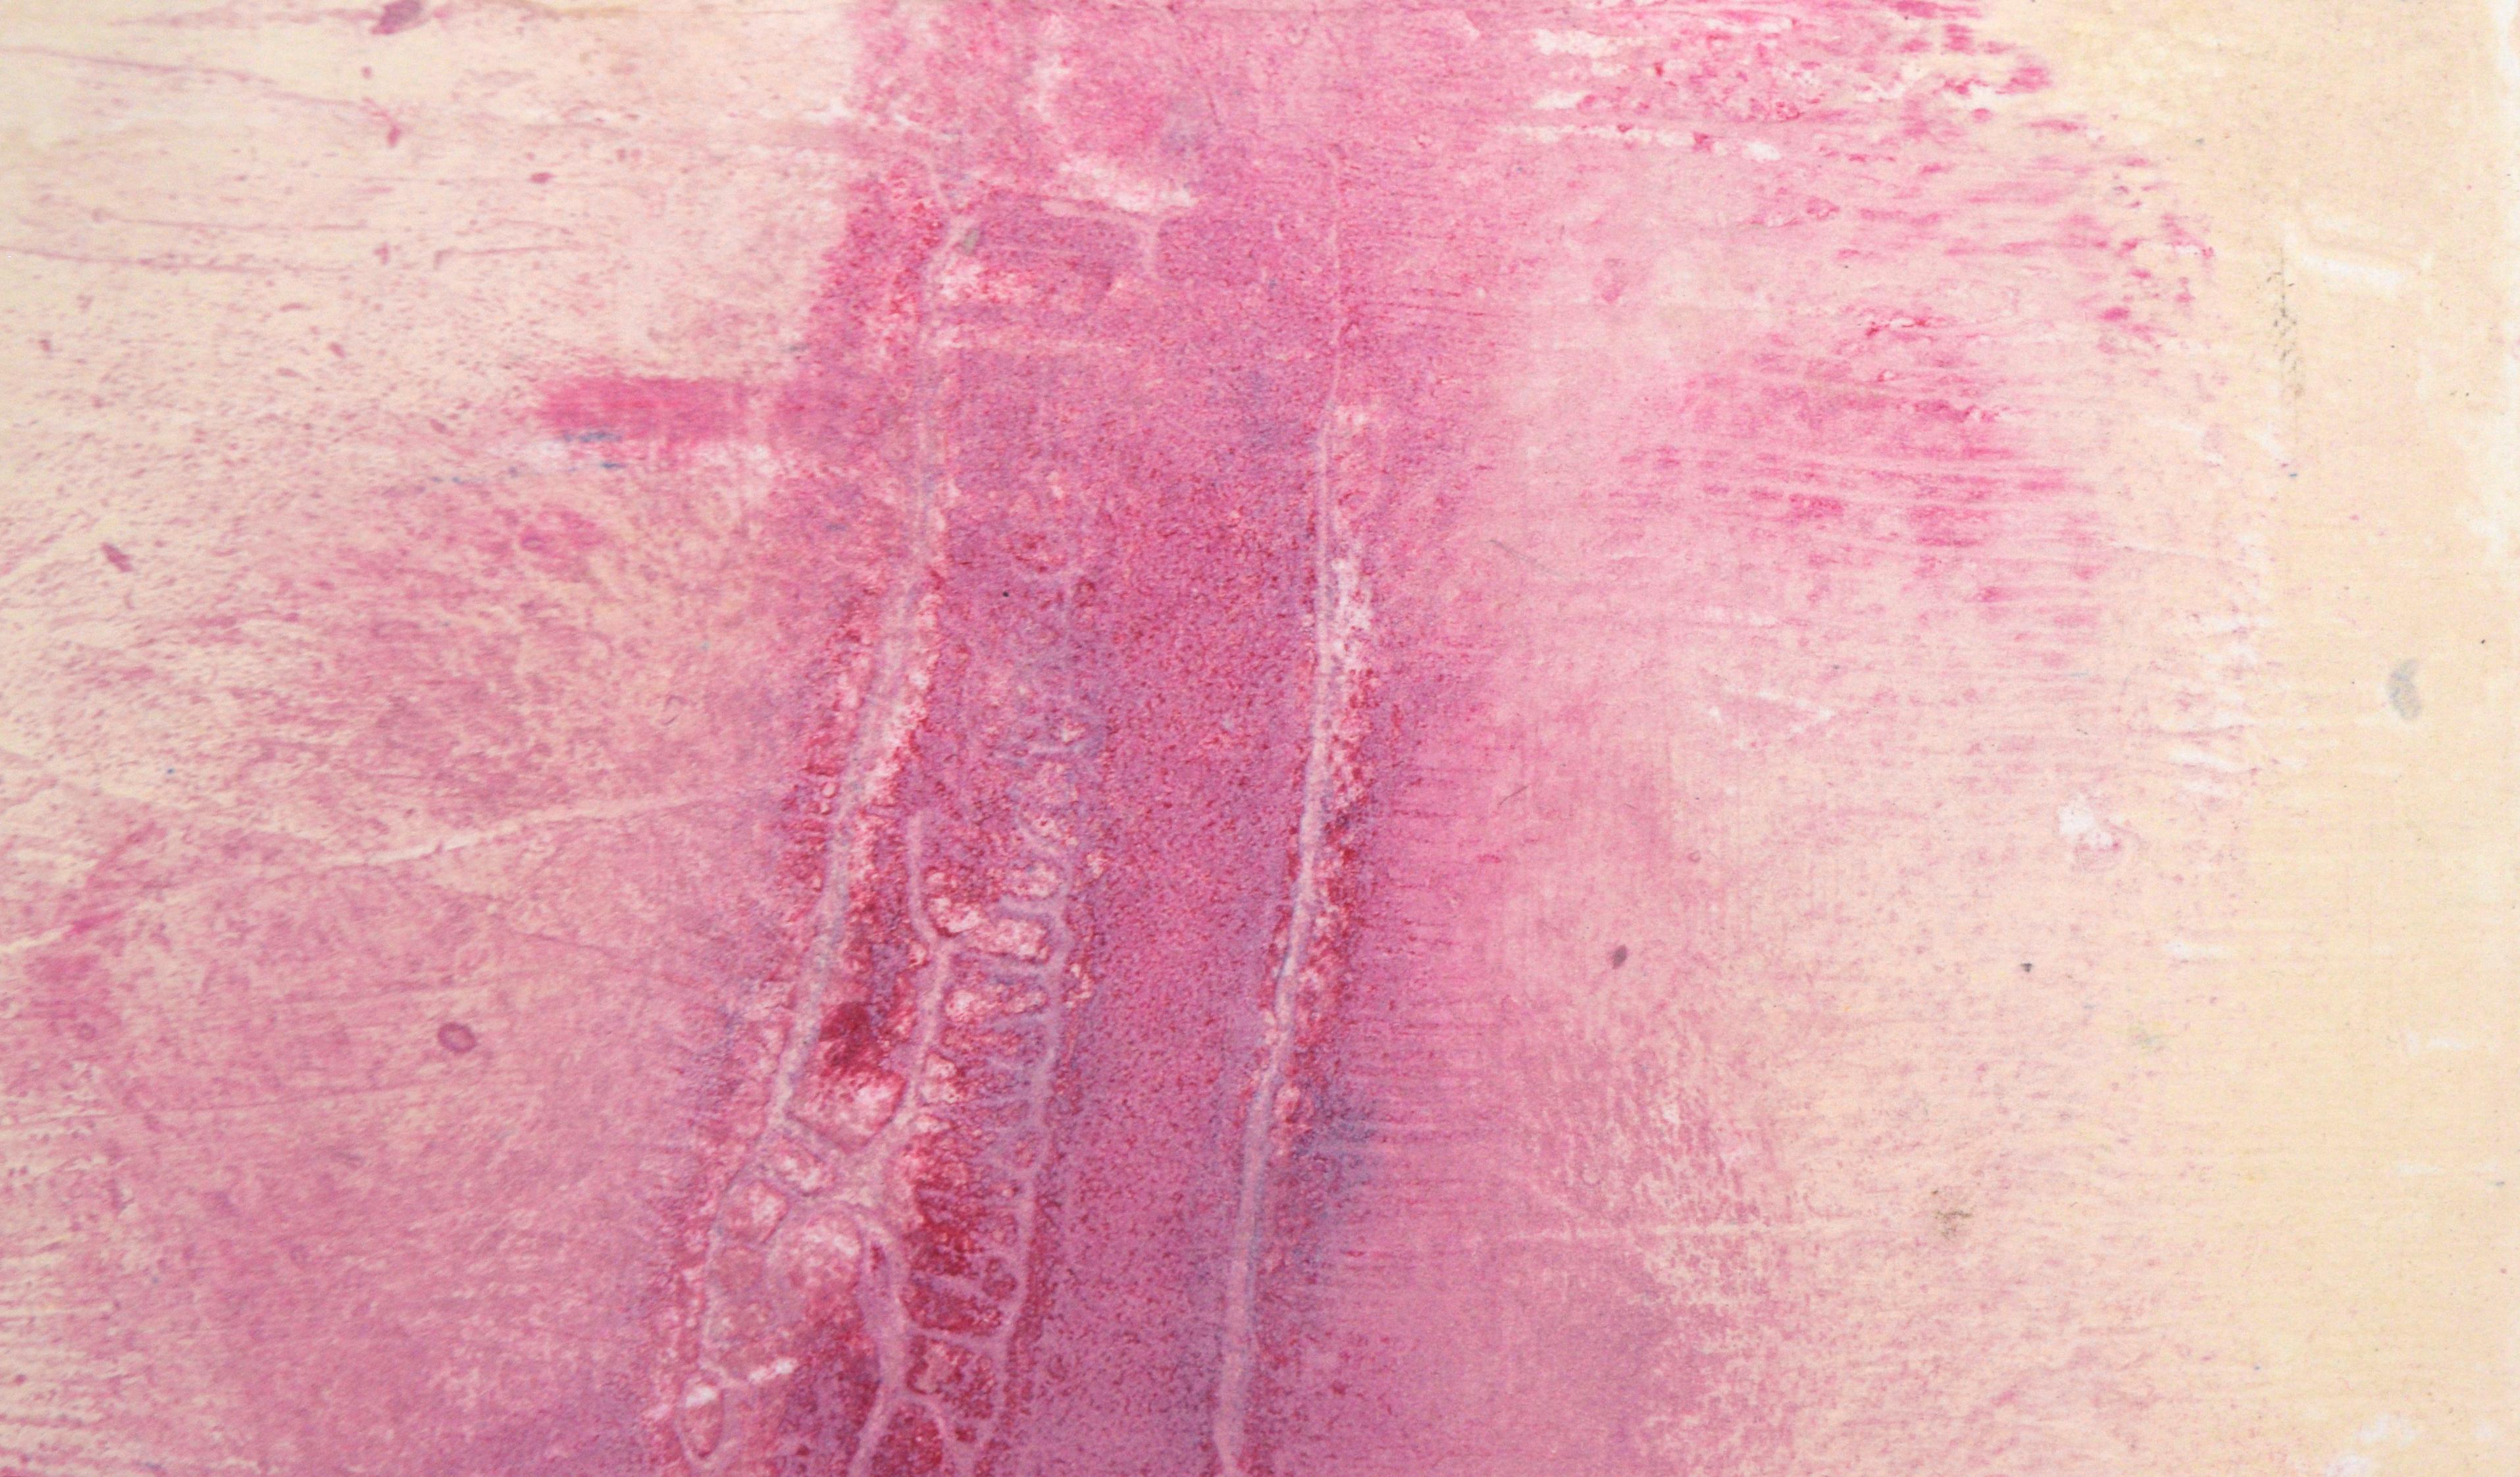 Pink on Yellow - Textured Transfer Monotype in Oil on Paper - Abstract Expressionist Print by Heather Speck